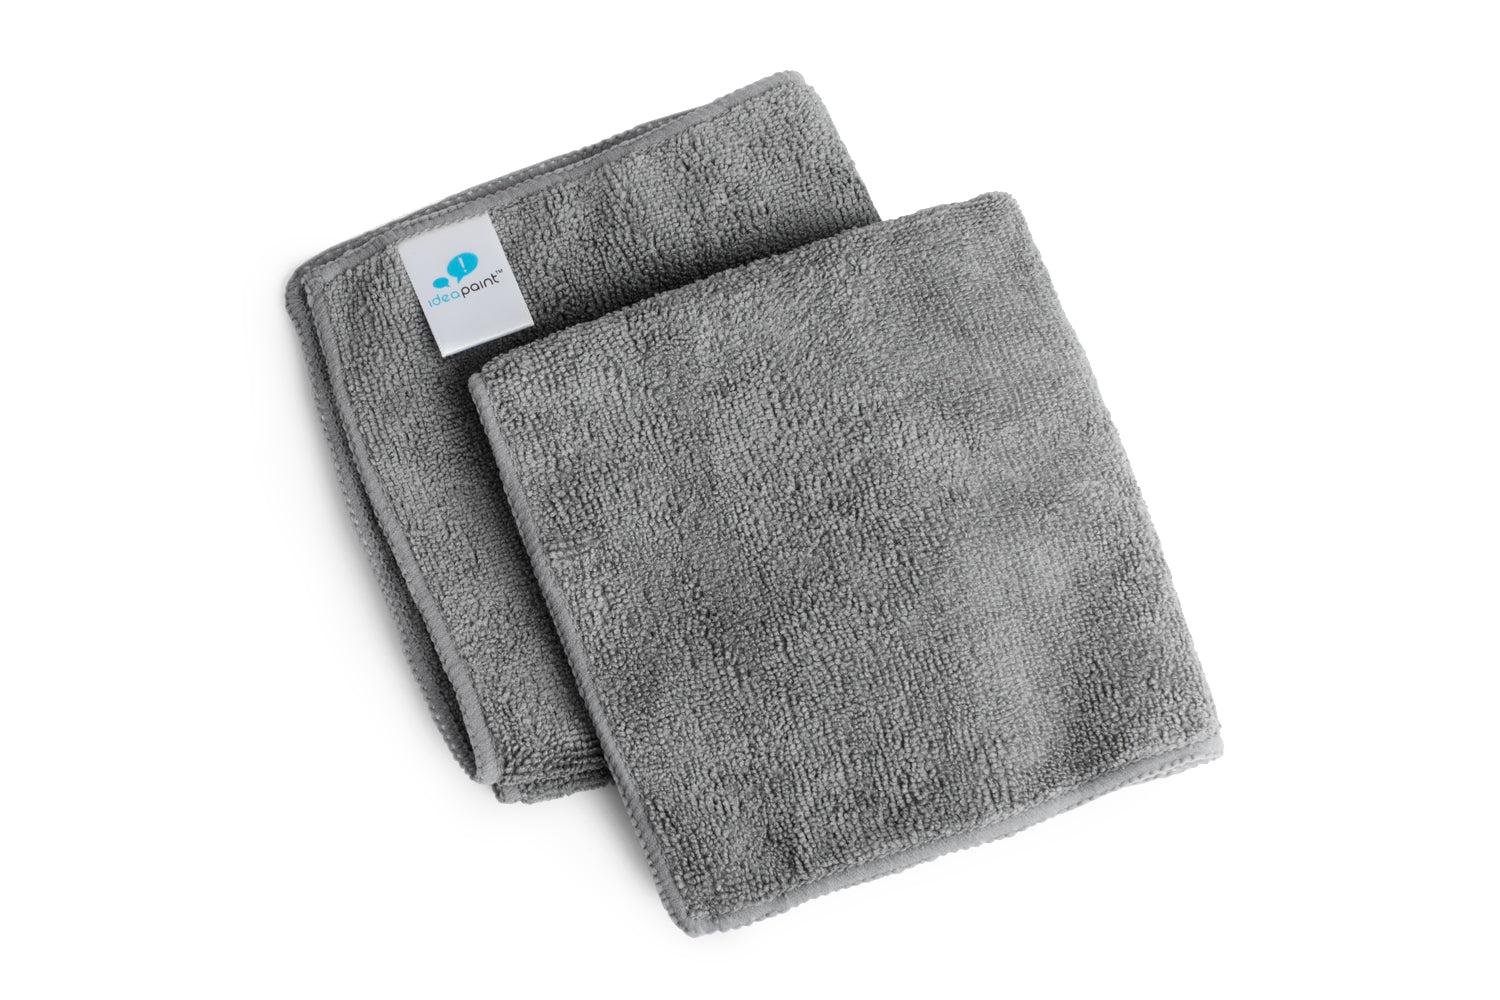 IdeaPaint Cleaning Cloths, Microfiber Dry Erase Cleaners